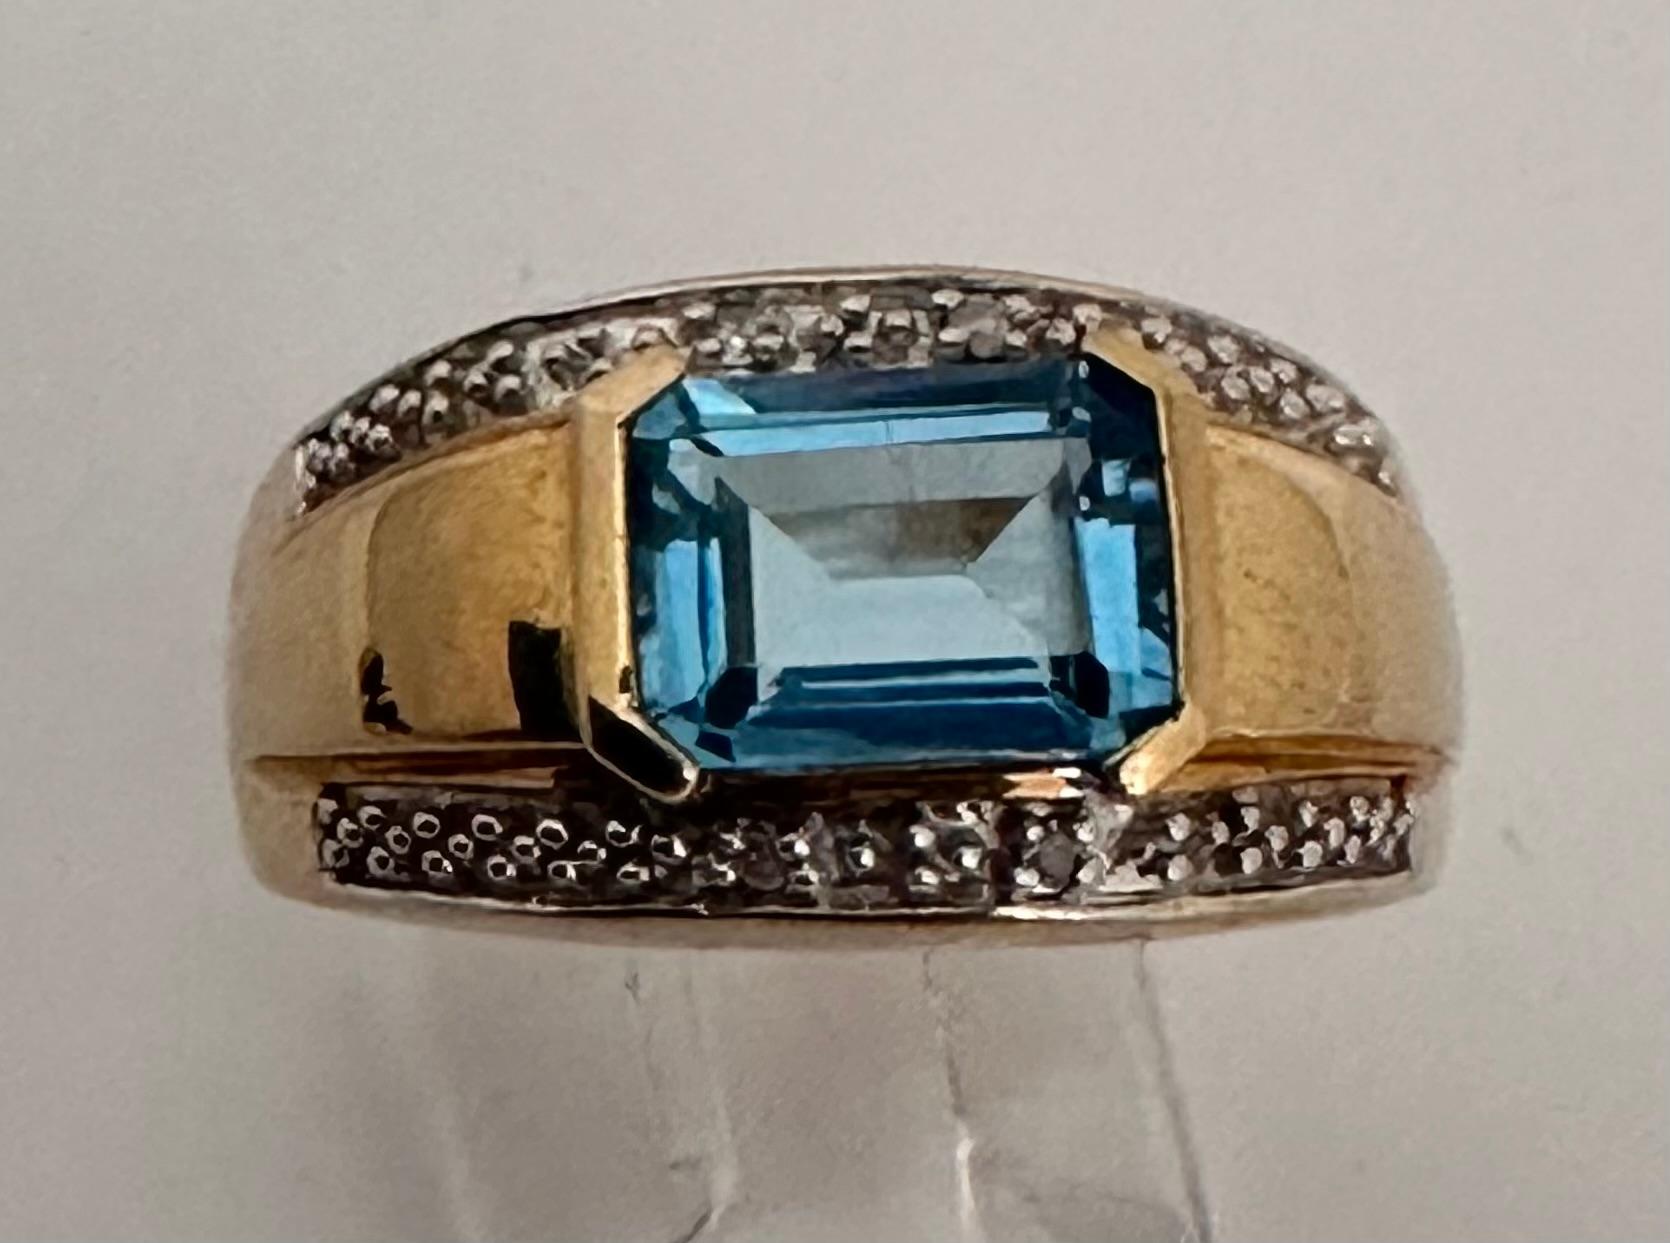 10k Yellow Gold 6mm x 8mm Emerald Cut Blue Topaz Diamond Ring Size 7 For Sale 3